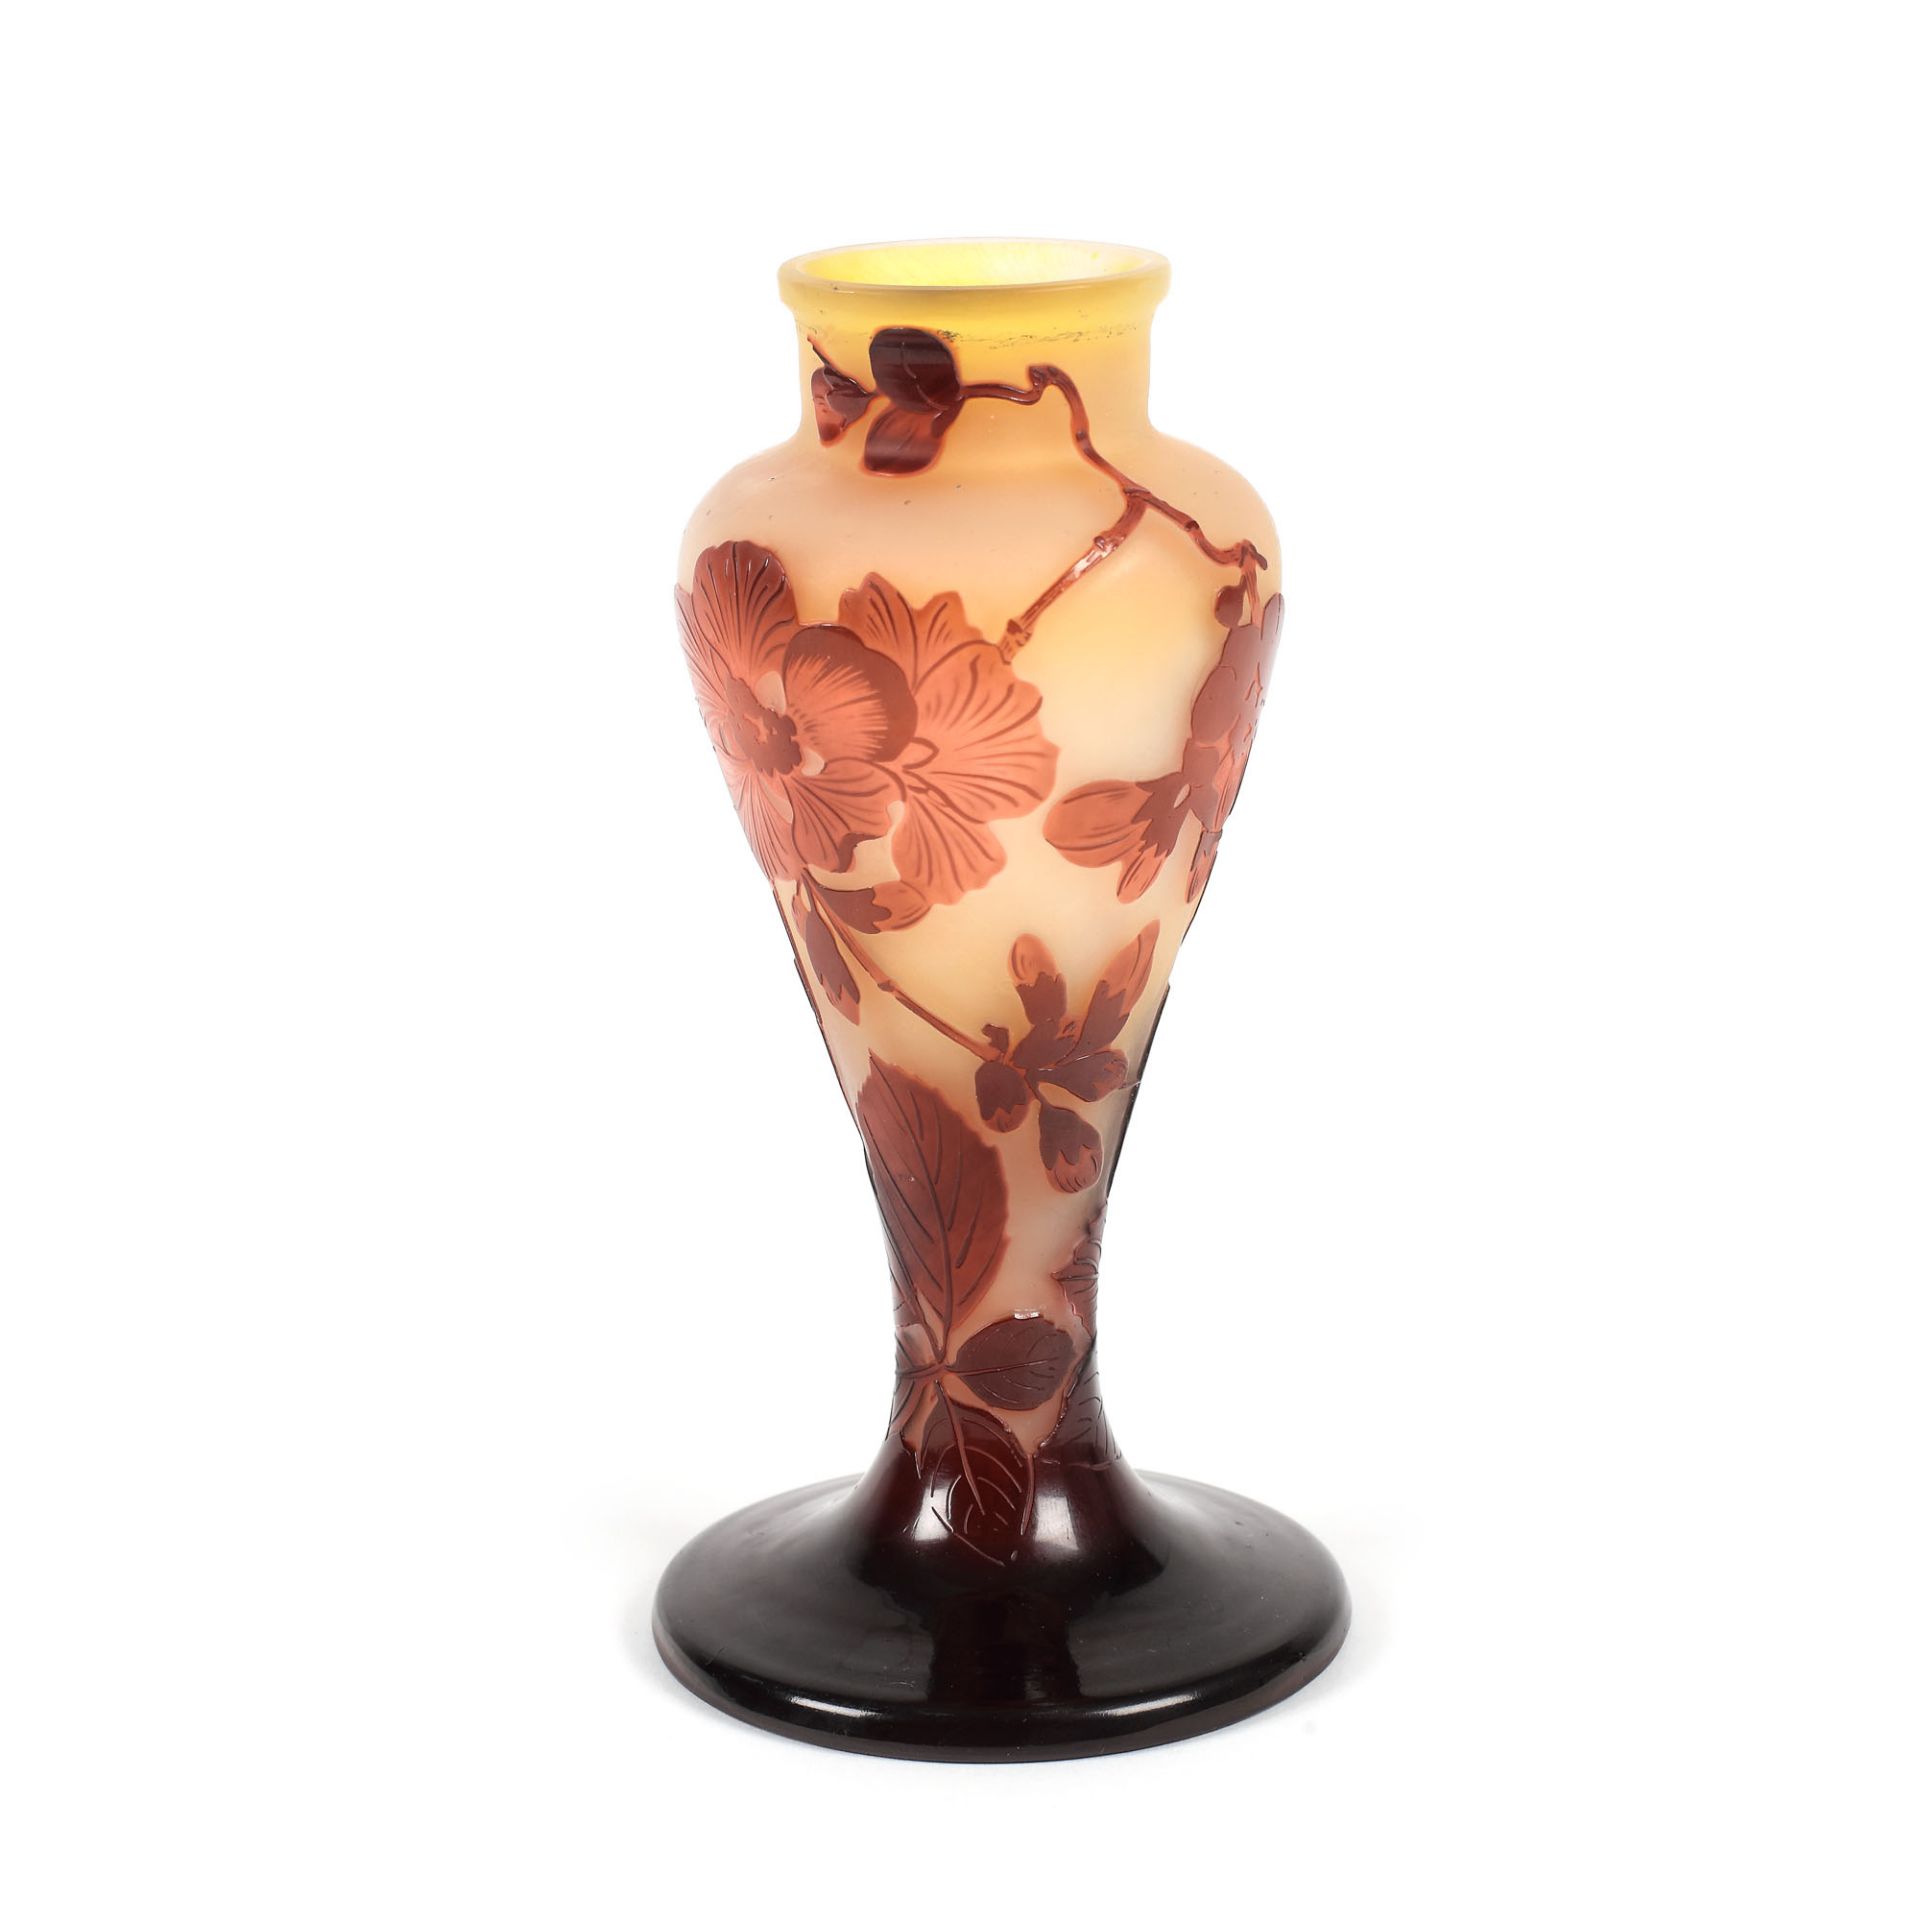 French workshop, Gallé vase, decorated with apple blossoms, in orange and yellow tones, approx. 1914 - Image 3 of 6